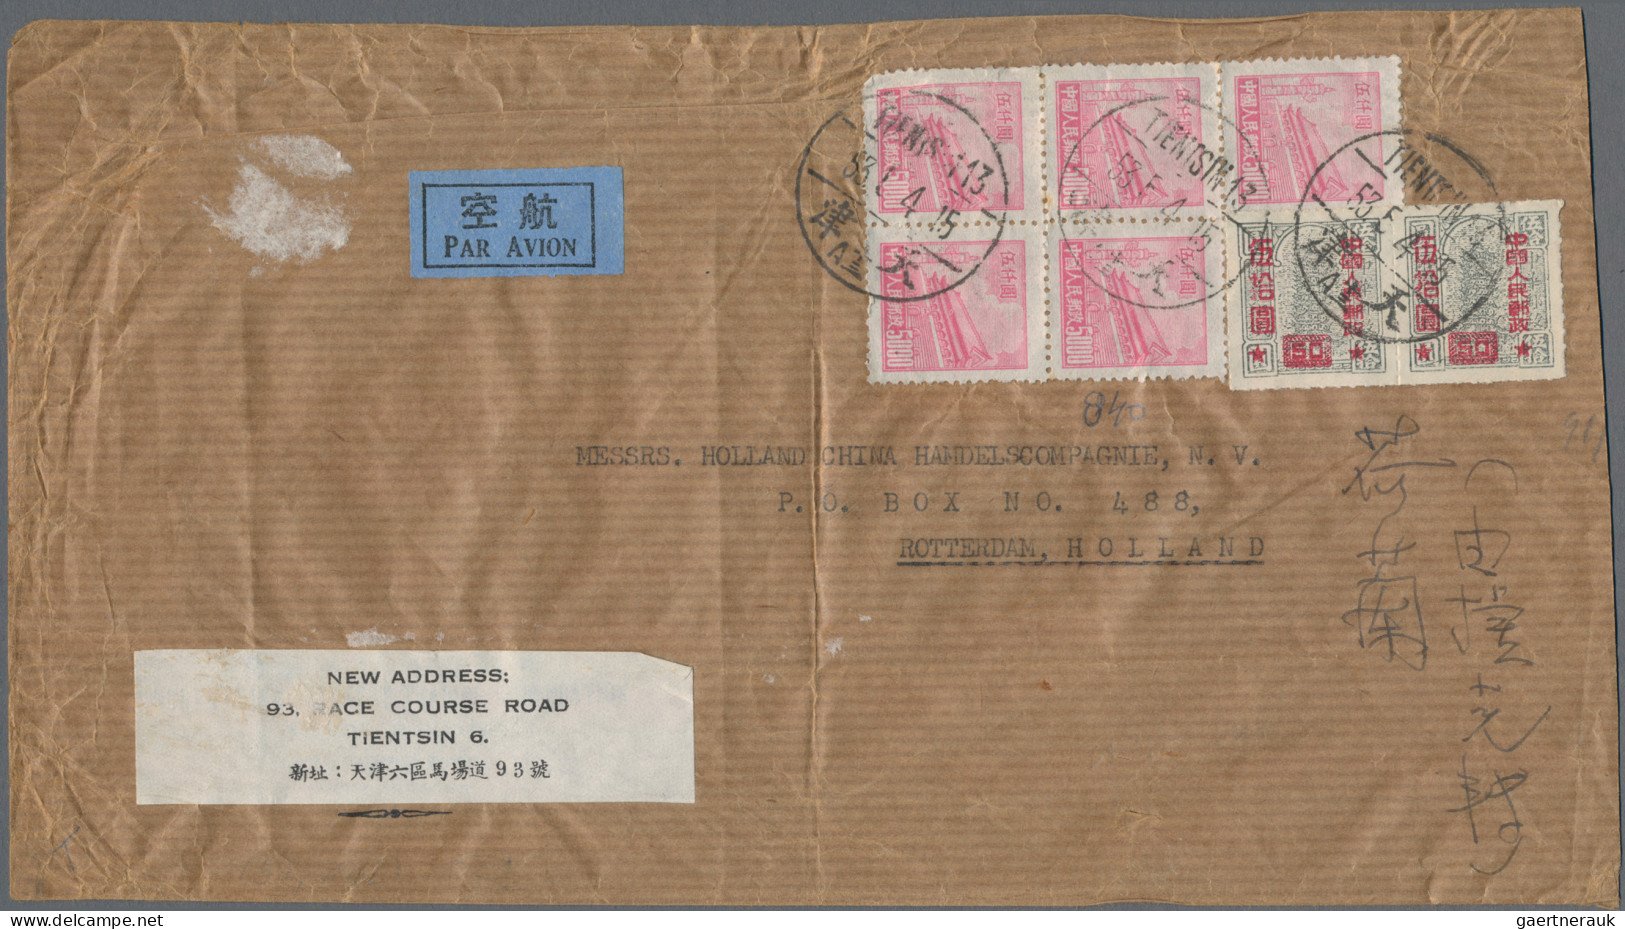 China (PRC): 1949/1955, group of 24 old currency covers, a postcard, and a parti